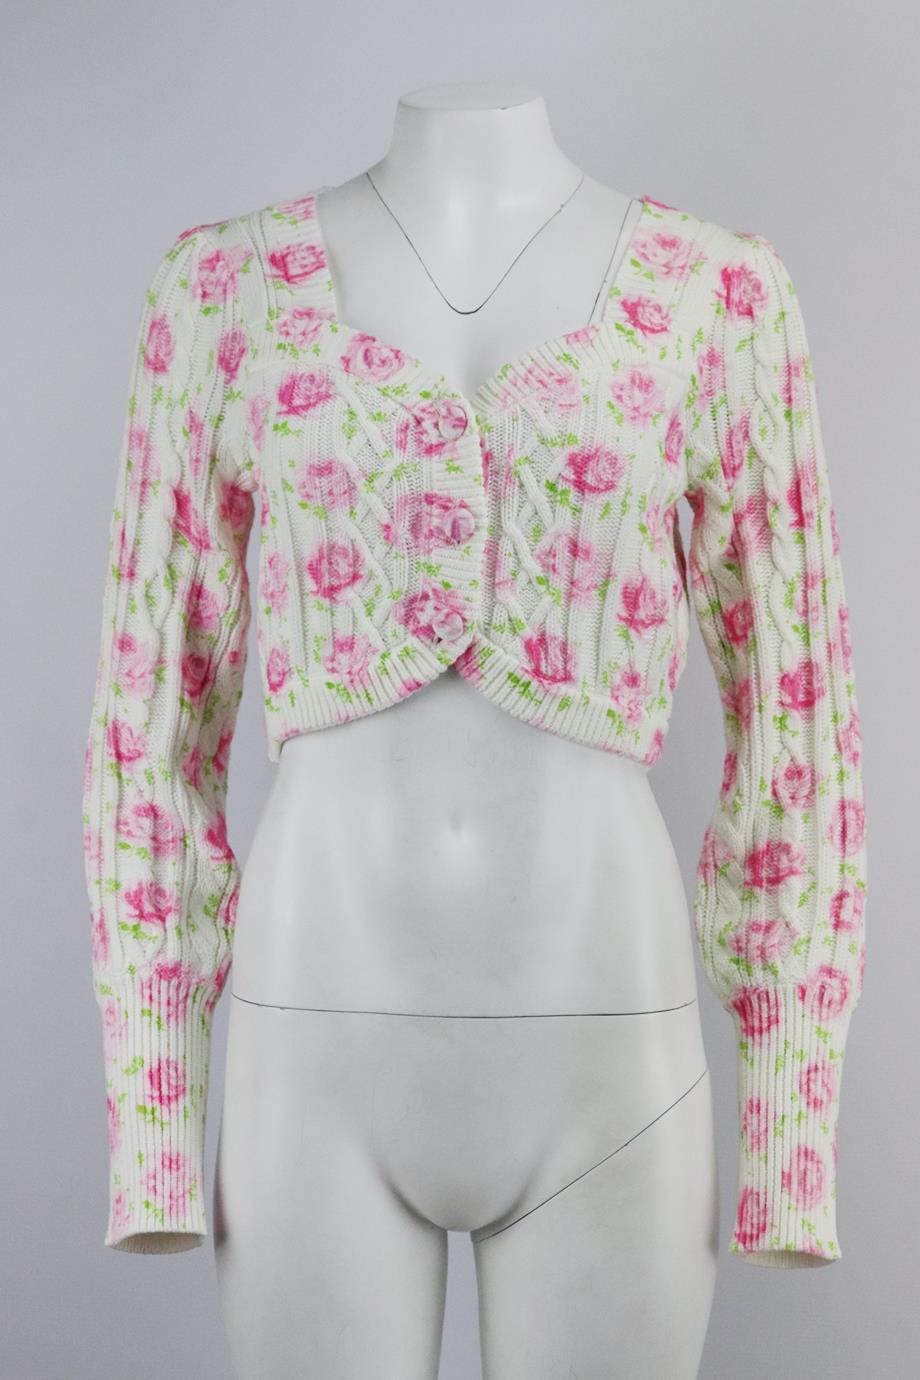 LoveShackFancy cropped floral print cotton cardigan. Pink, cream and green. Long sleeve, v-neck. Button fastening at front. 100% Cotton. Size: Medium (UK 10, US 6, FR 38, IT 42). Bust: 36 in. Waist: 30 in. Length: 16.5 in. Very good condition - As